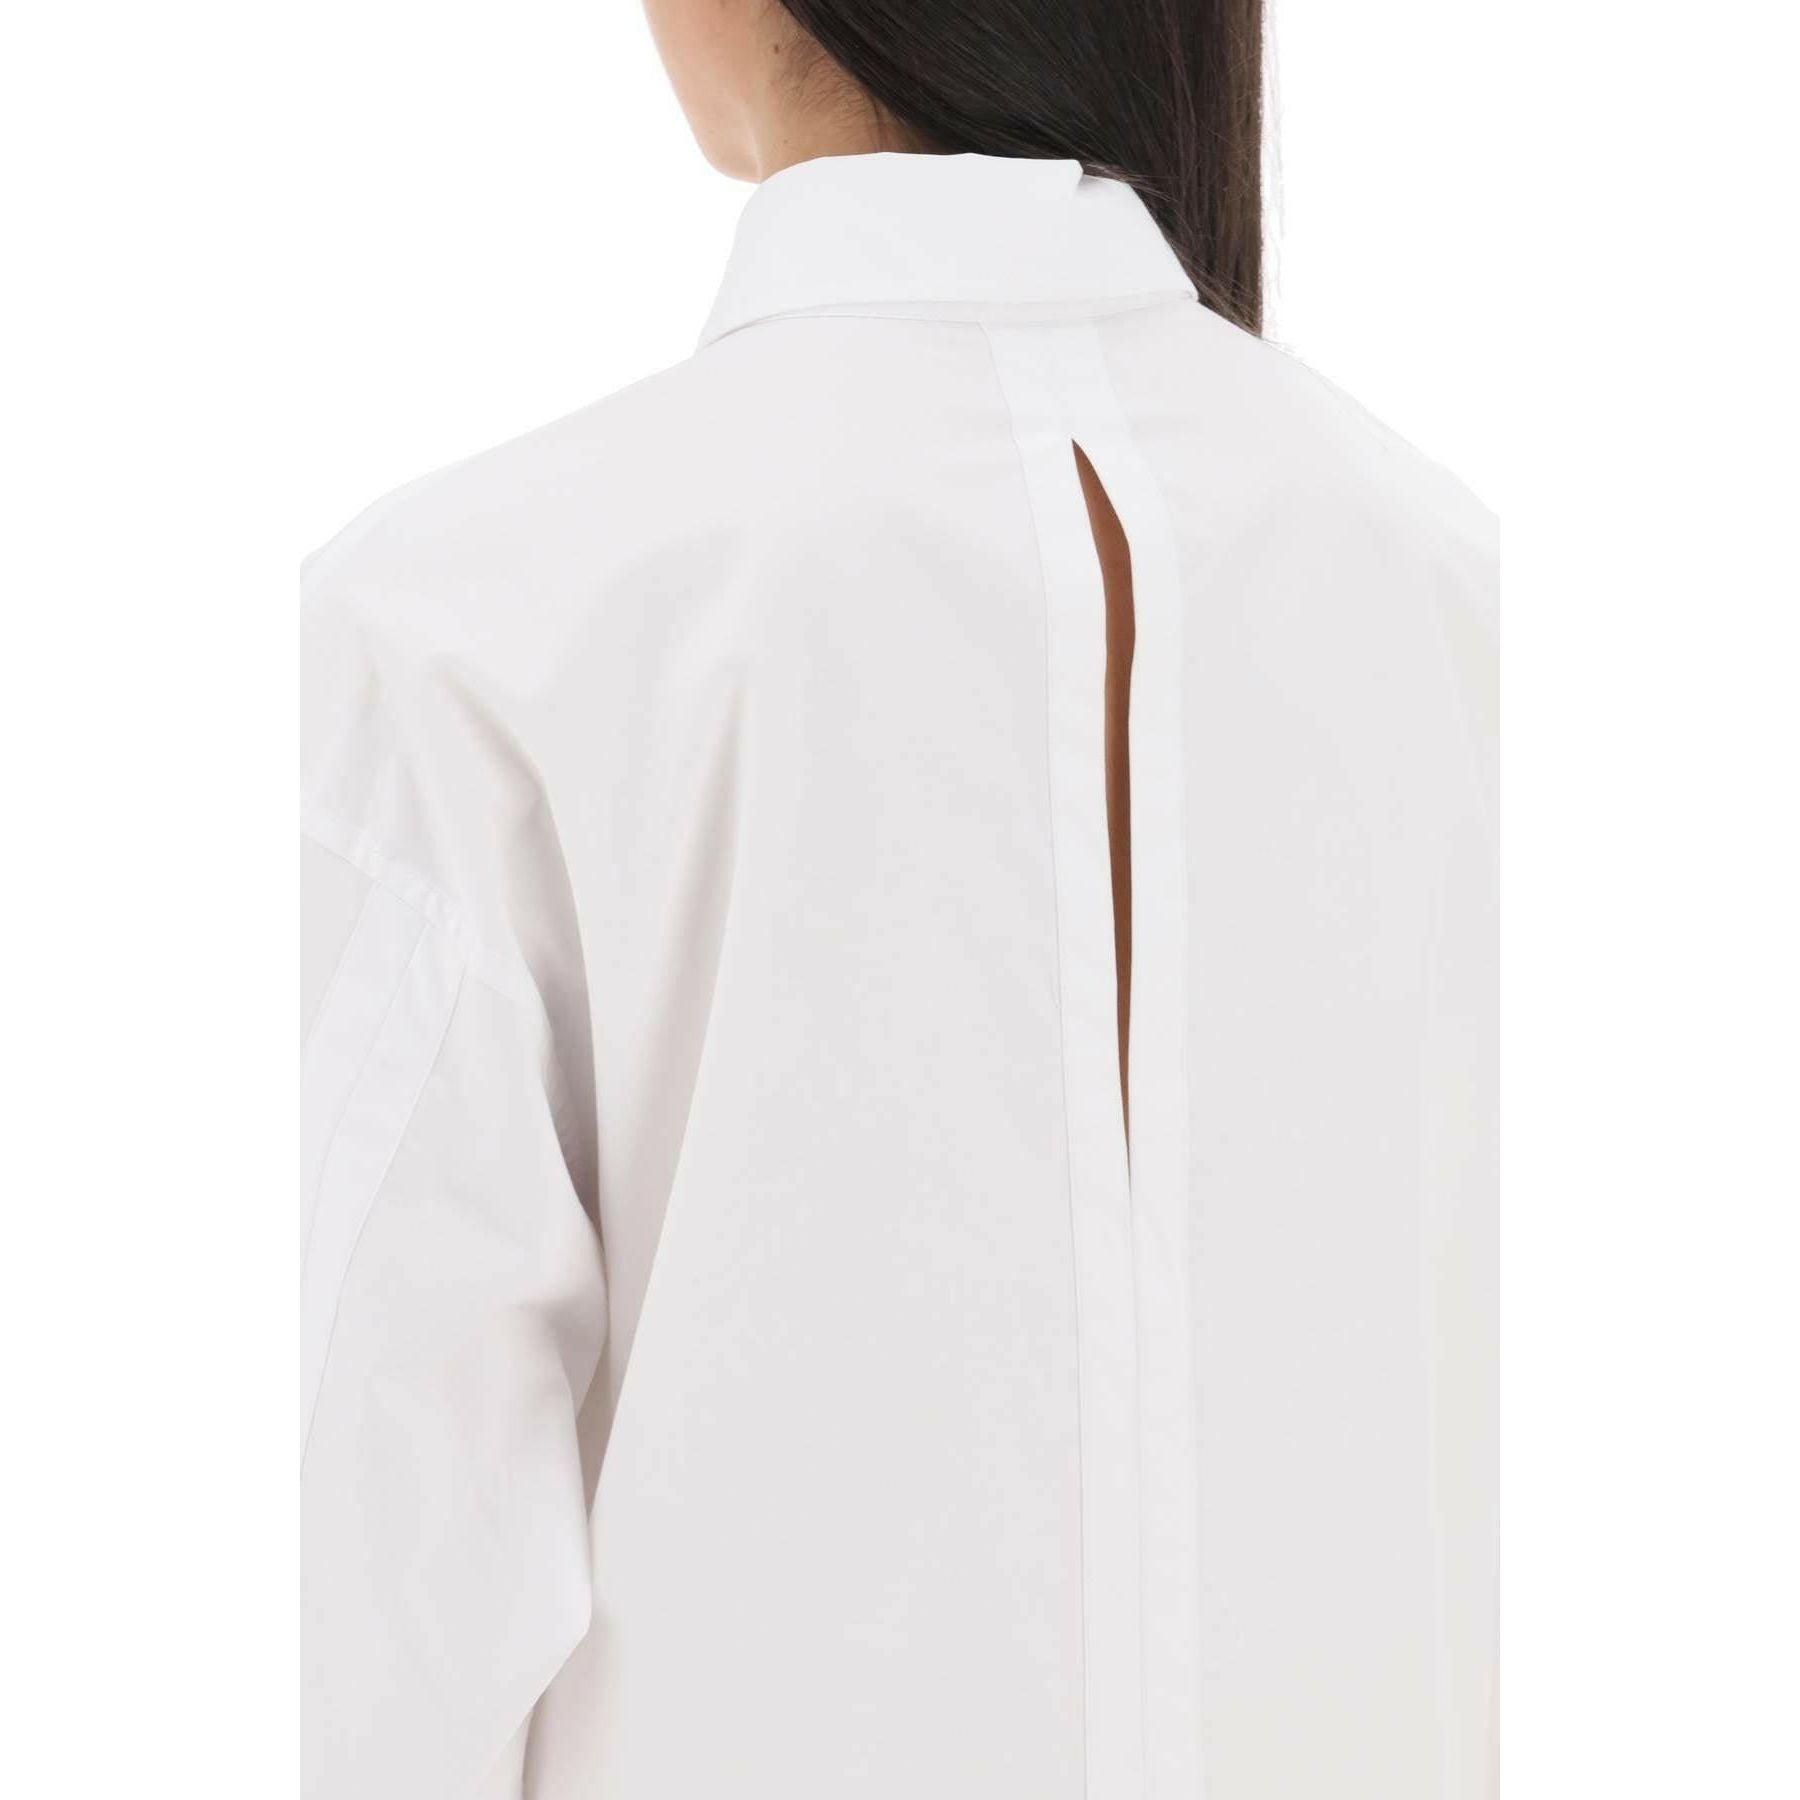 Relaxed Fit Shirt with Open Back Detail CLOSED JOHN JULIA.